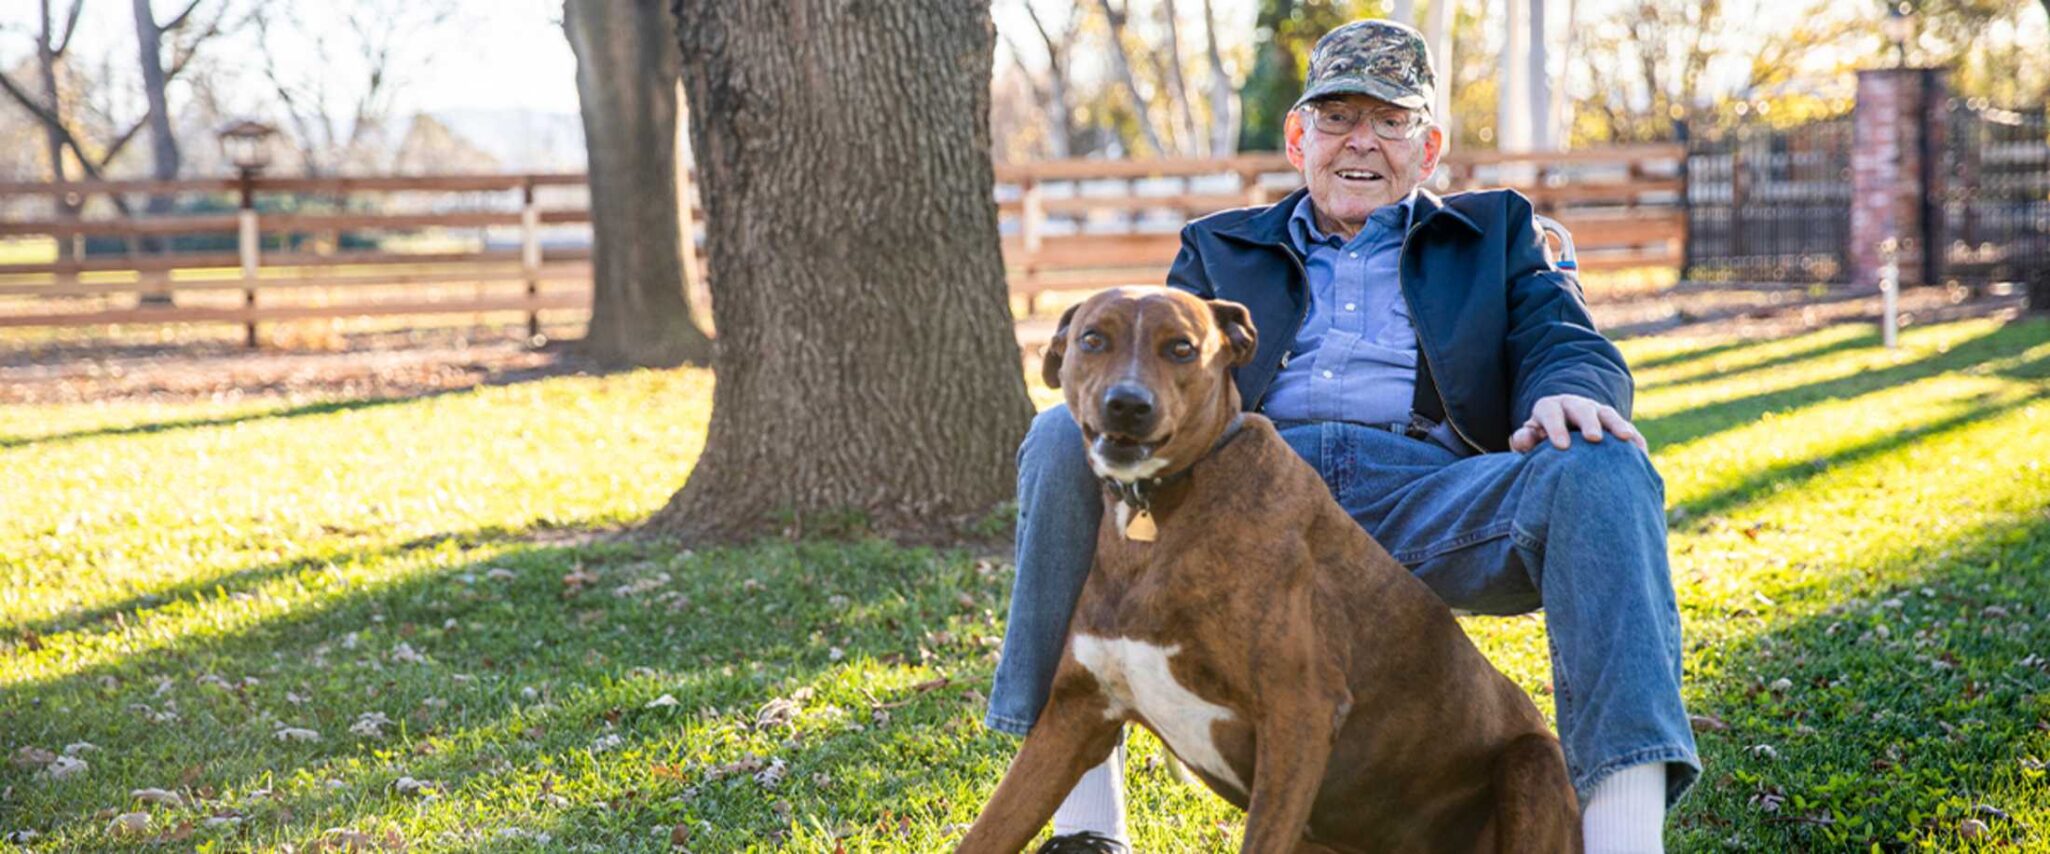 An elderly man sits outside with his dog